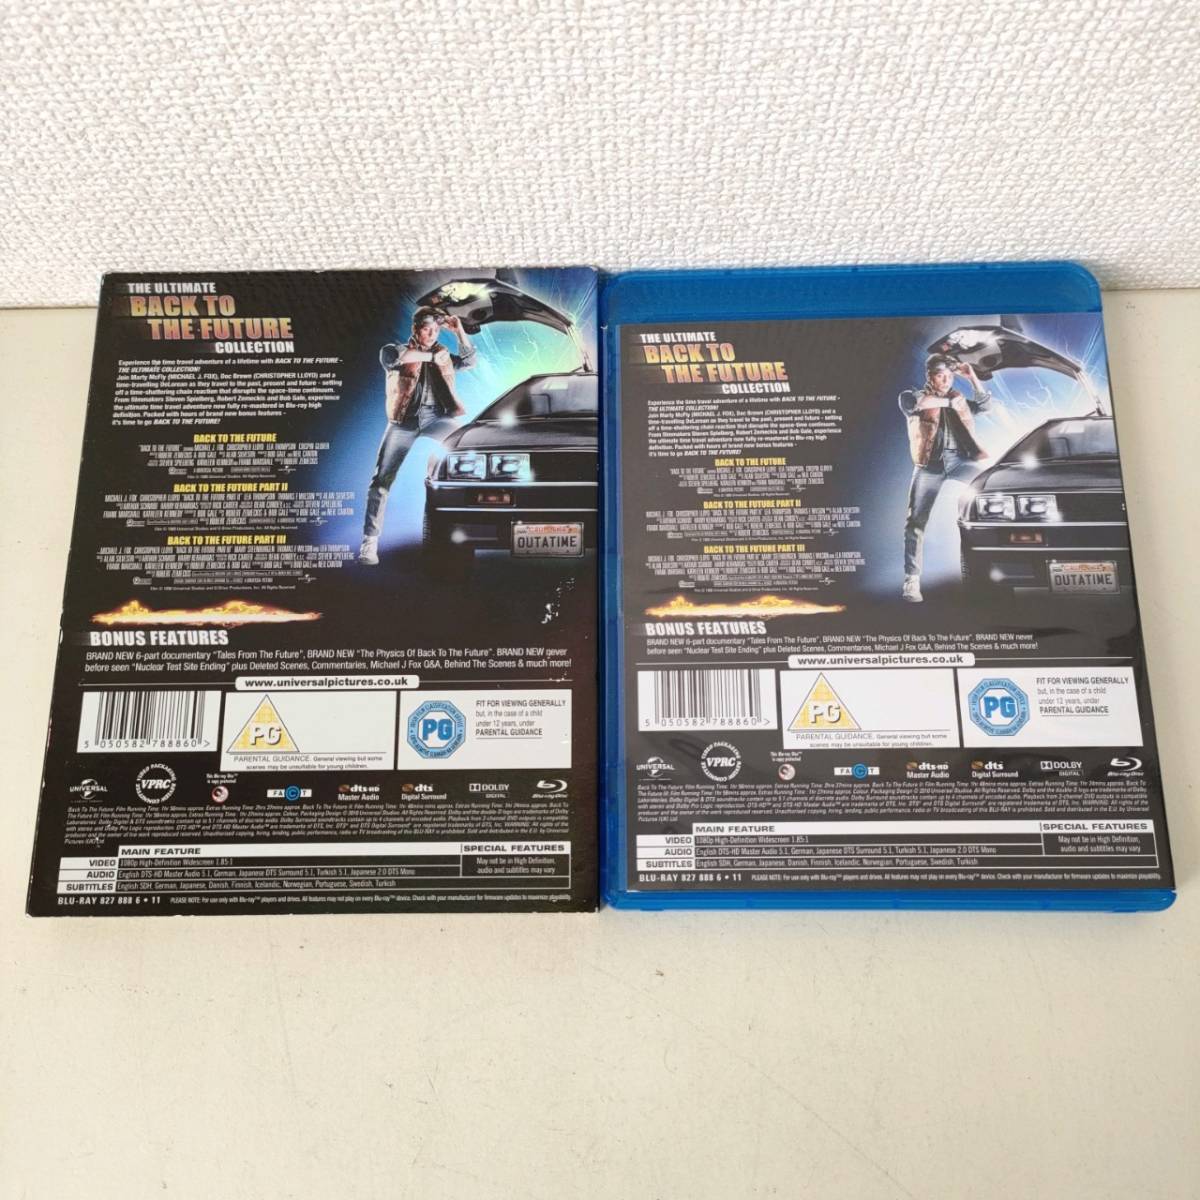 A01-4 洋画 Blu-ray BACK TO THE FUTURE TRILOGY 輸入盤 ブルーレイ バックトゥザフューチャー_画像3